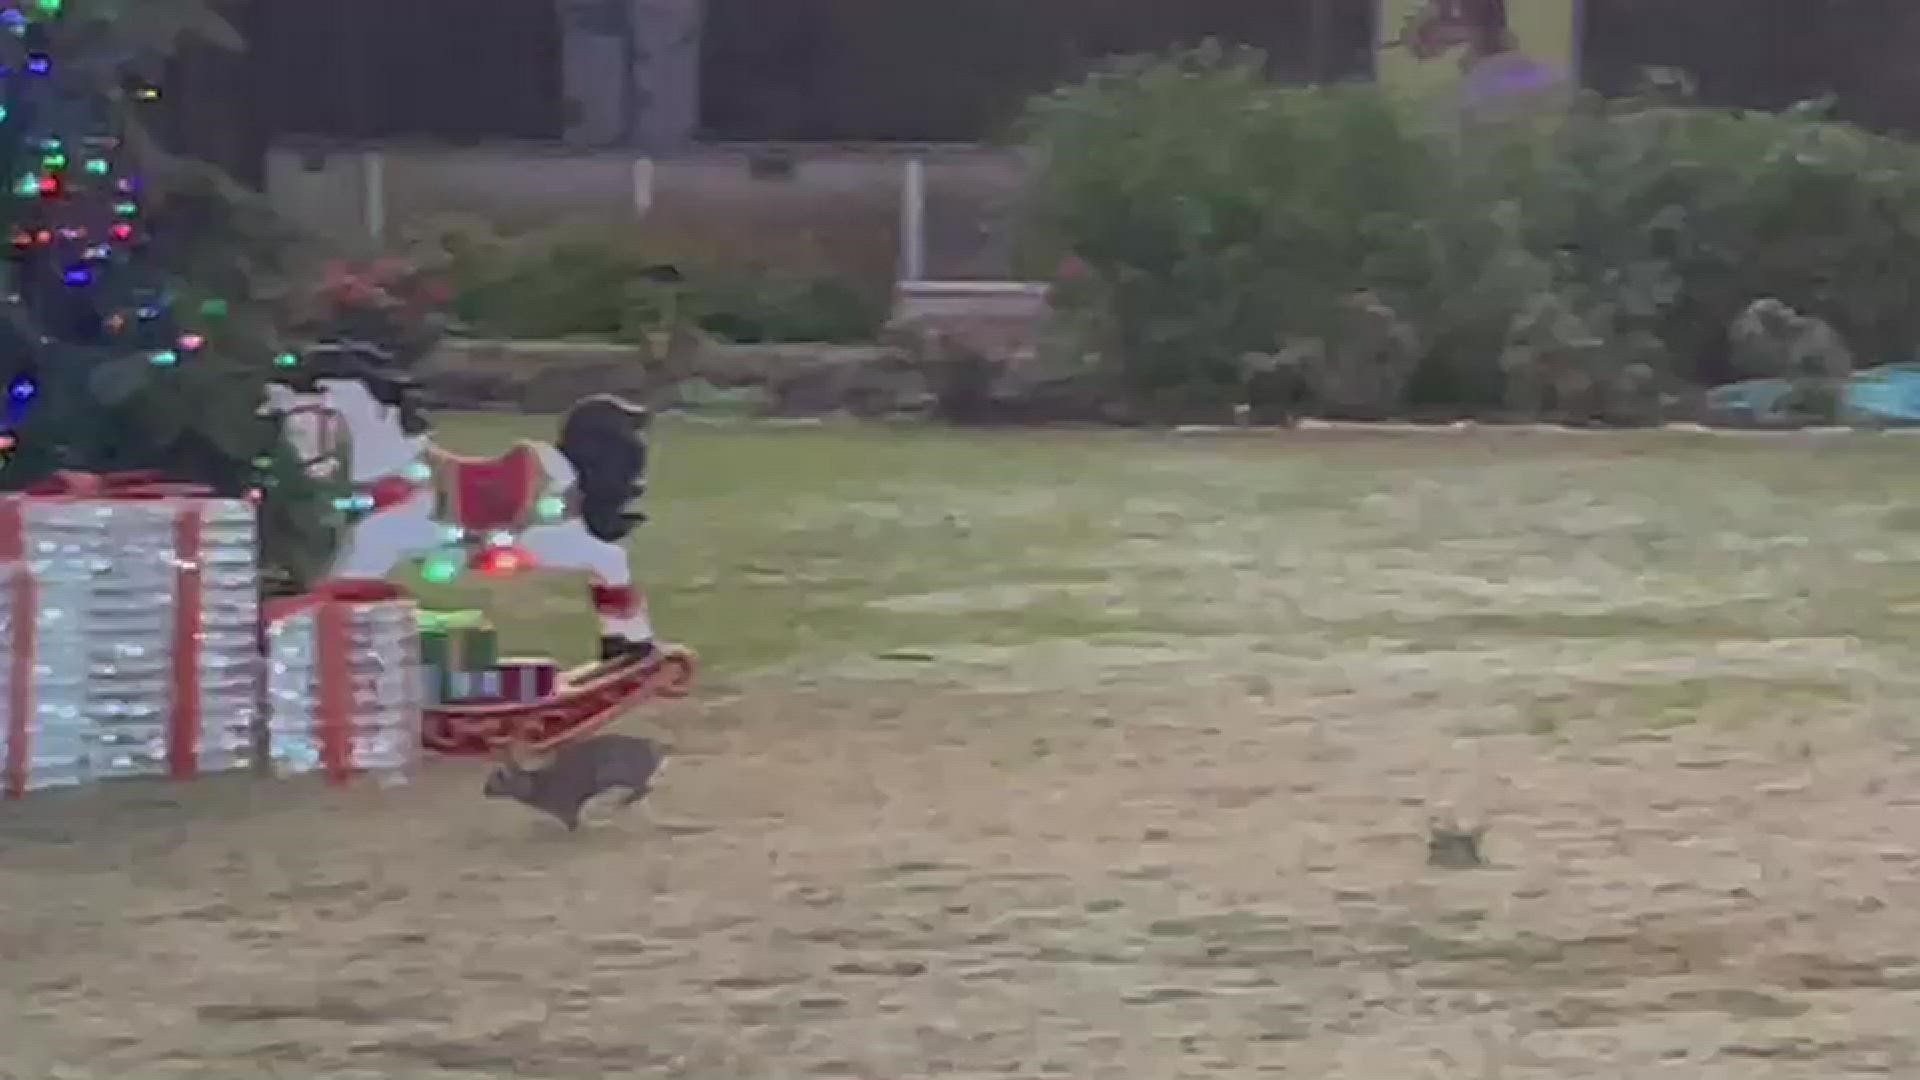 Everybunny hop on over to the South Texas Botanical Gardens and Nature Center for the last weekend of Holly Days!